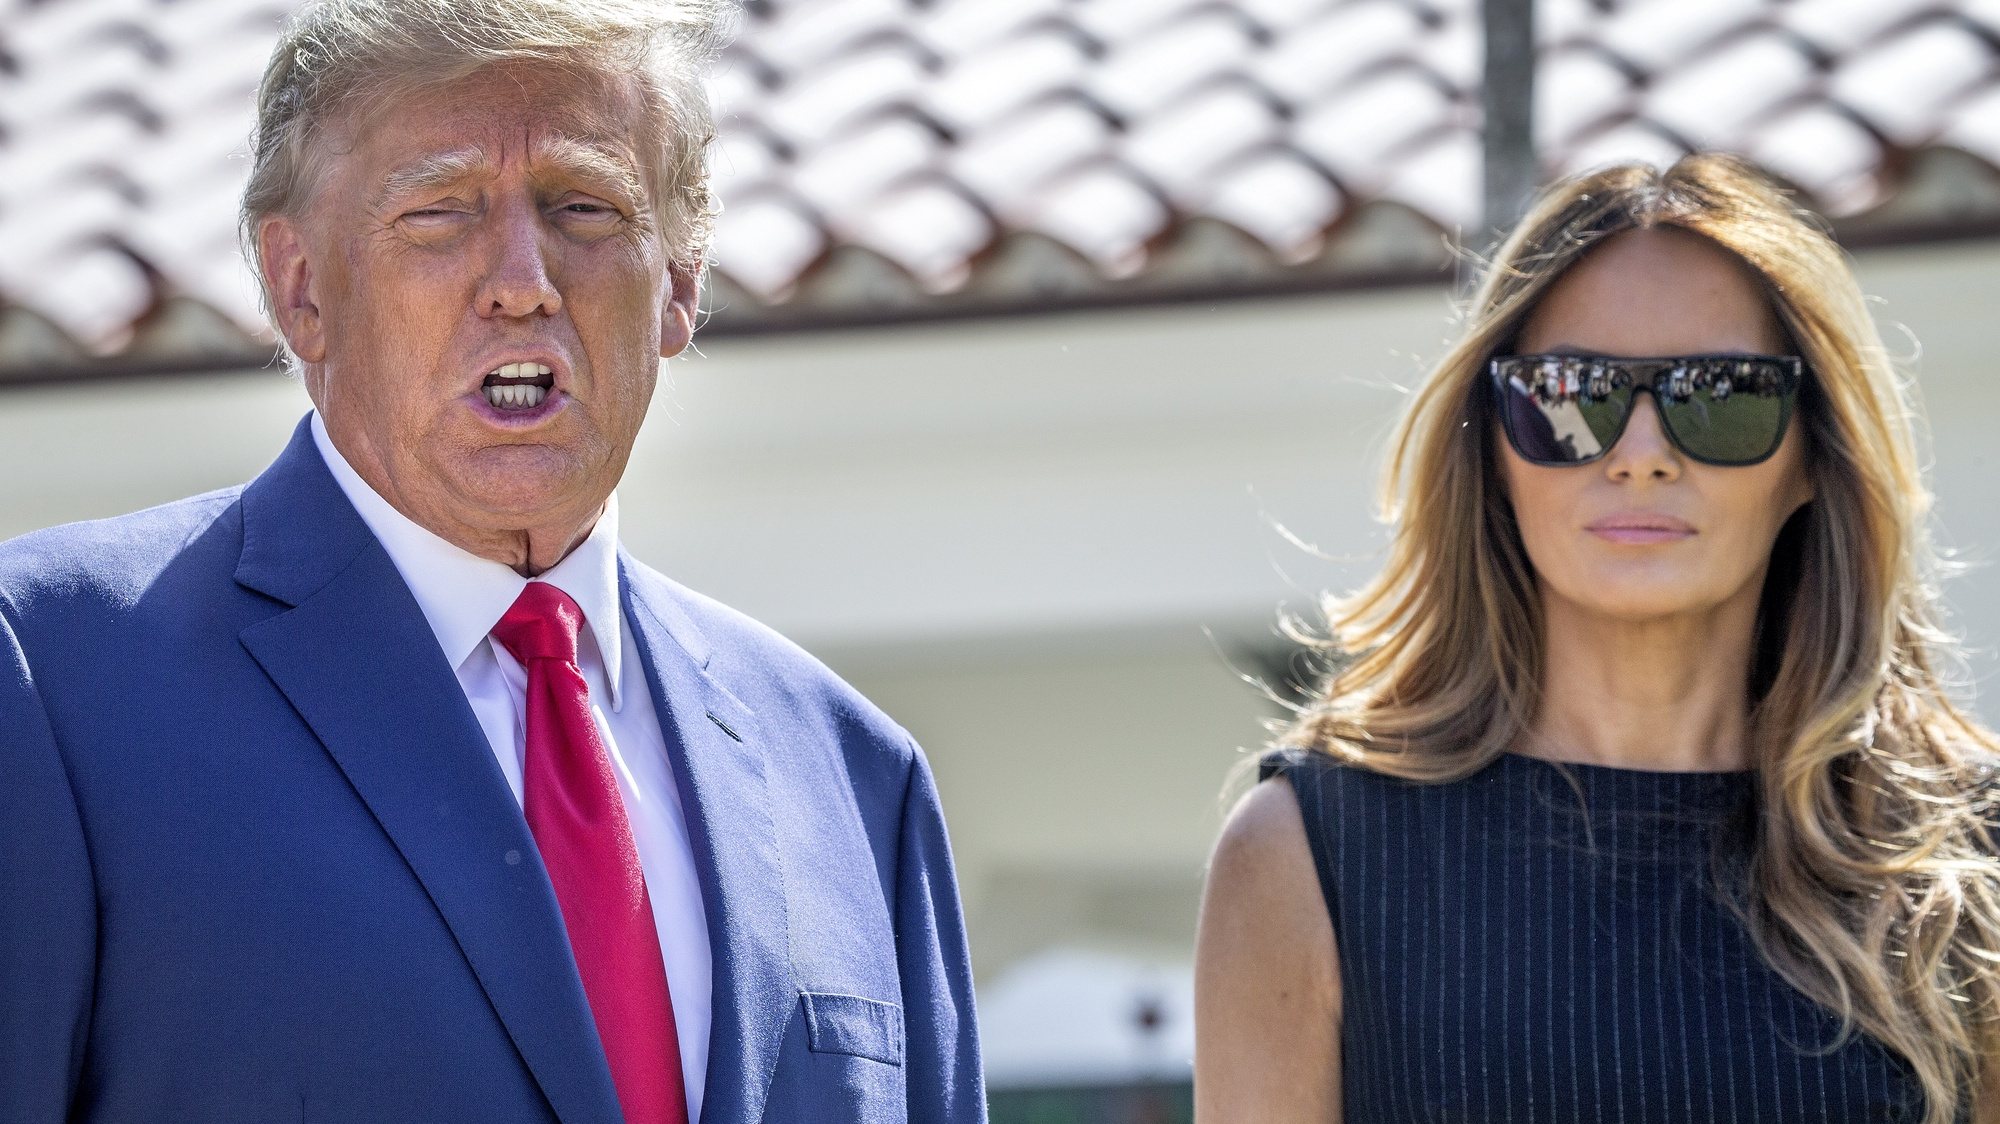 epa10294160 Former US President Donald J. Trump (L) and former First Lady Melania Trump (R), walk out of the electoral precinct after voting in-person at the Morton and Barbara Mandel Recreation Center in Palm Beach, Florida, USA, 08 October 2022. The US midterm elections are held every four years at the midpoint of each presidential term and this year include elections for all 435 seats in the House of Representatives, 35 of the 100 seats in the Senate and 36 of the 50 state governors as well as numerous other local seats and ballot issues.  EPA/CRISTOBAL HERRERA-ULASHKEVICH